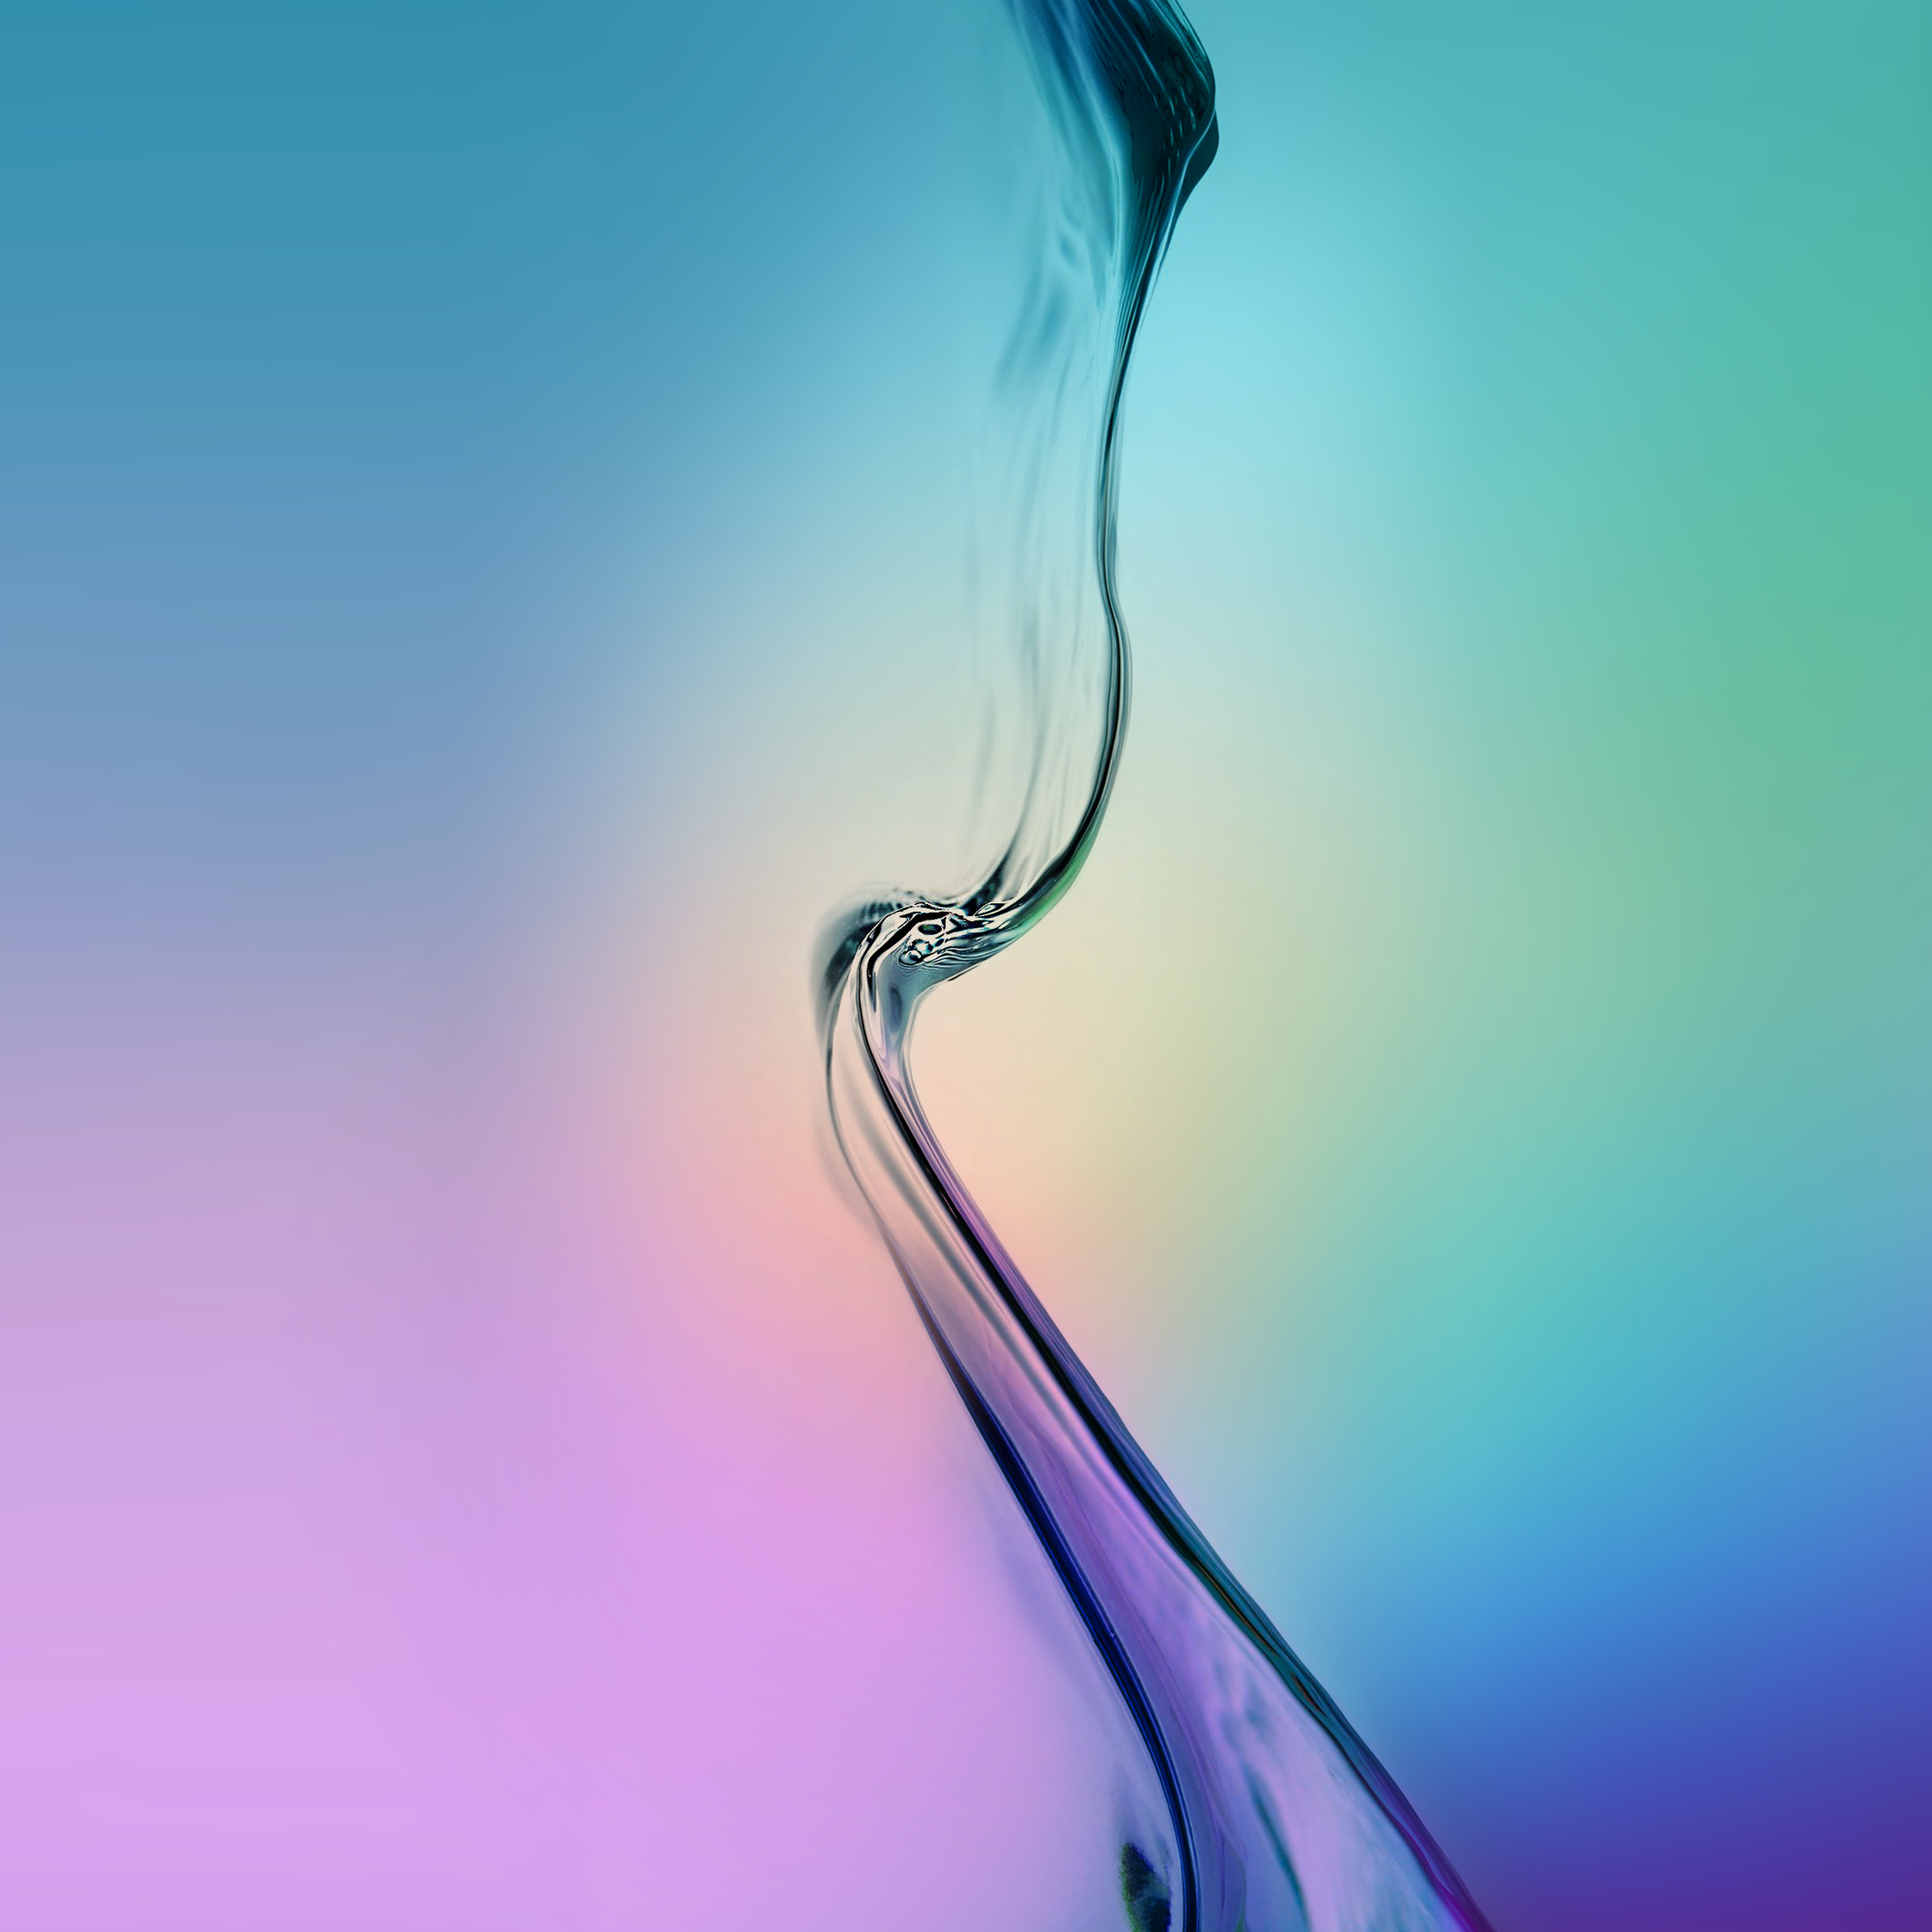  gift from SamMobile Galaxy S6 and Galaxy S6 Edge default wallpapers